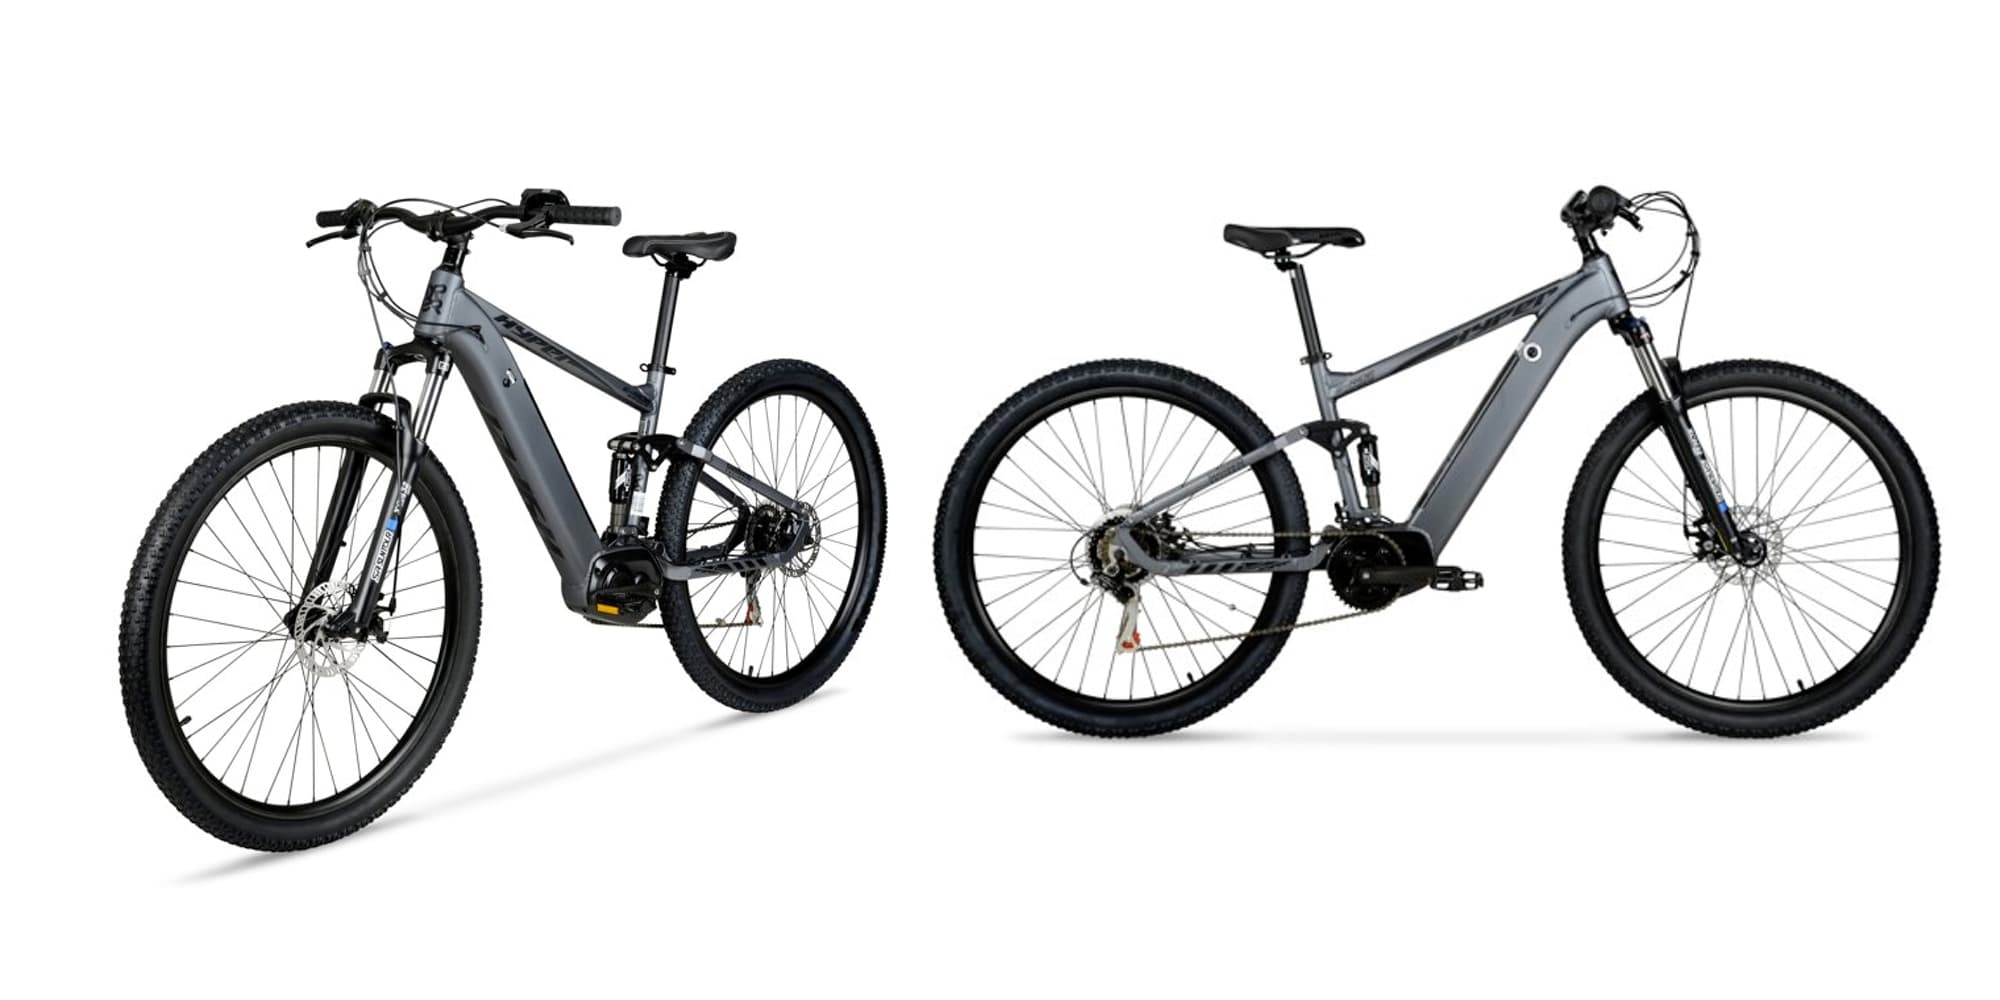 Kents low-cost full-suspension mid-drive e-bike has Walmart moving on up